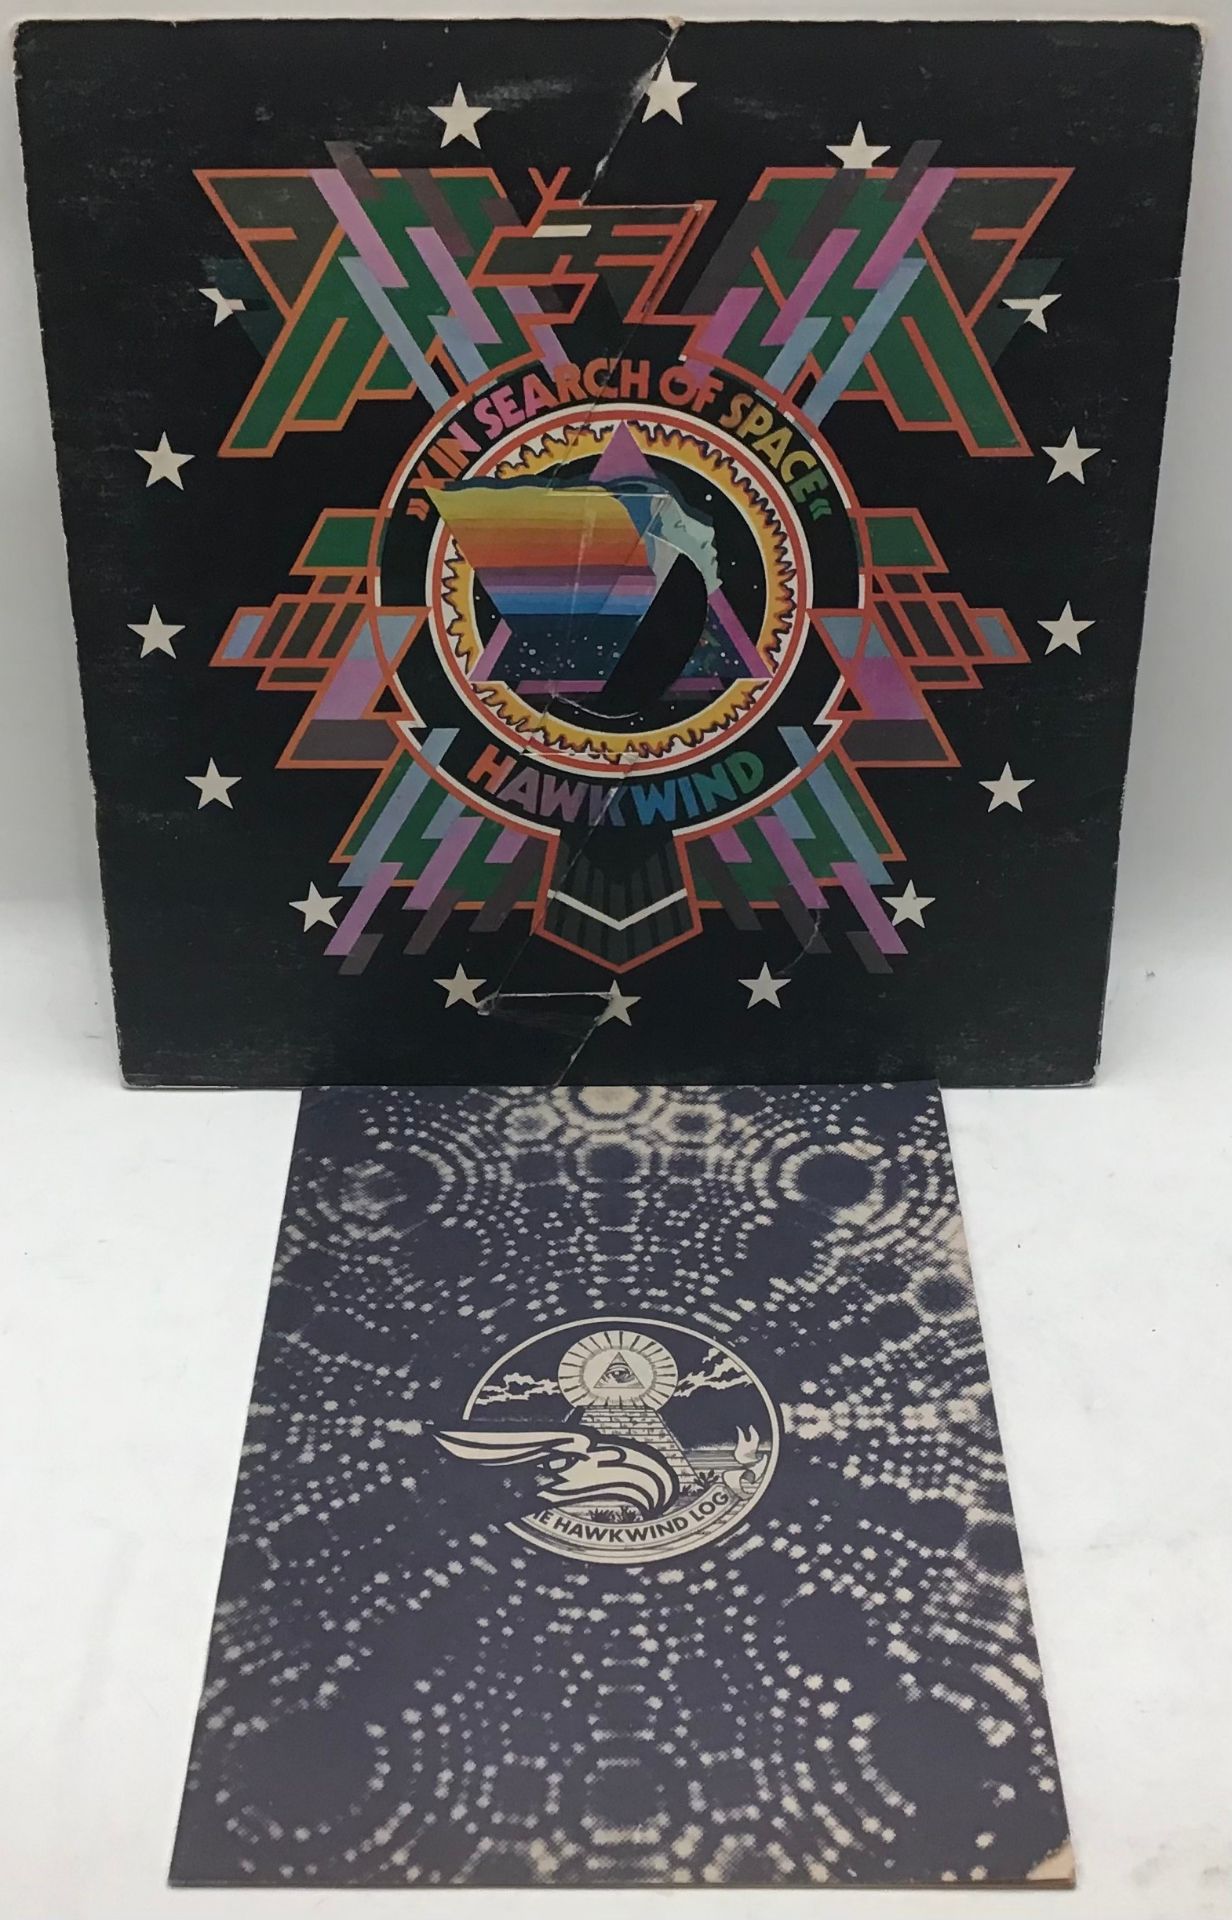 HAWKWIND LP 'IN SEARCH OF SPACE?. Fantastic condition album here on United Artist?s UAG 29202 from